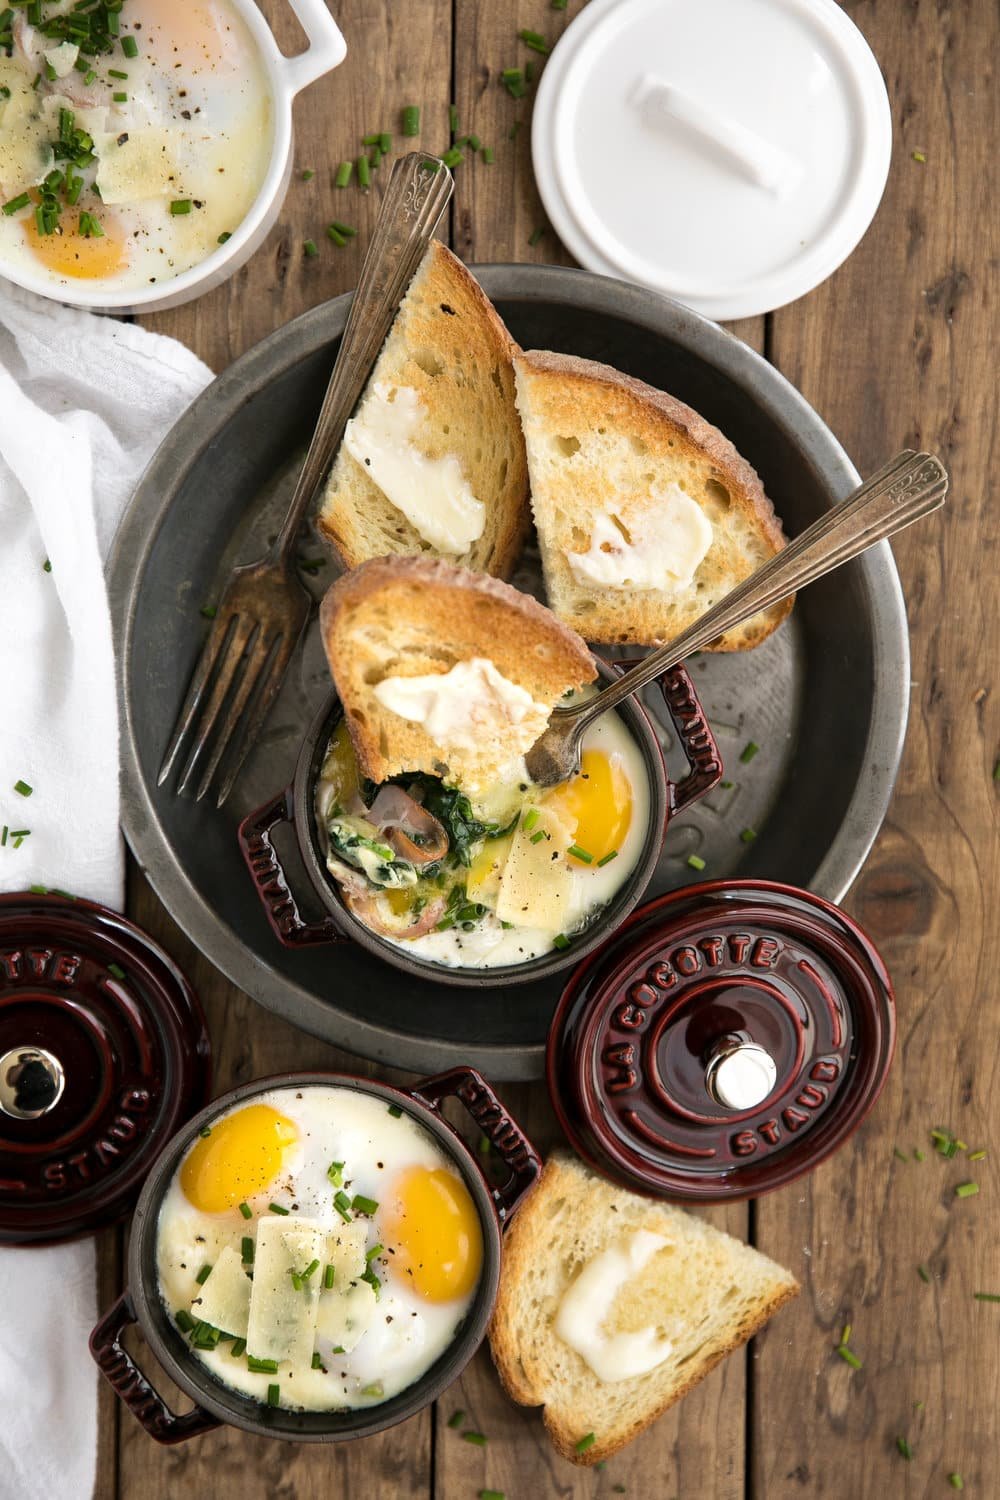 Perfect for entertaining but easy enough to make for just one, these Creamy Baked Eggs in Mini Cocottes with Spinach and prosciutto are delicious, fun-size and the perfect place to dip all the buttered bread.